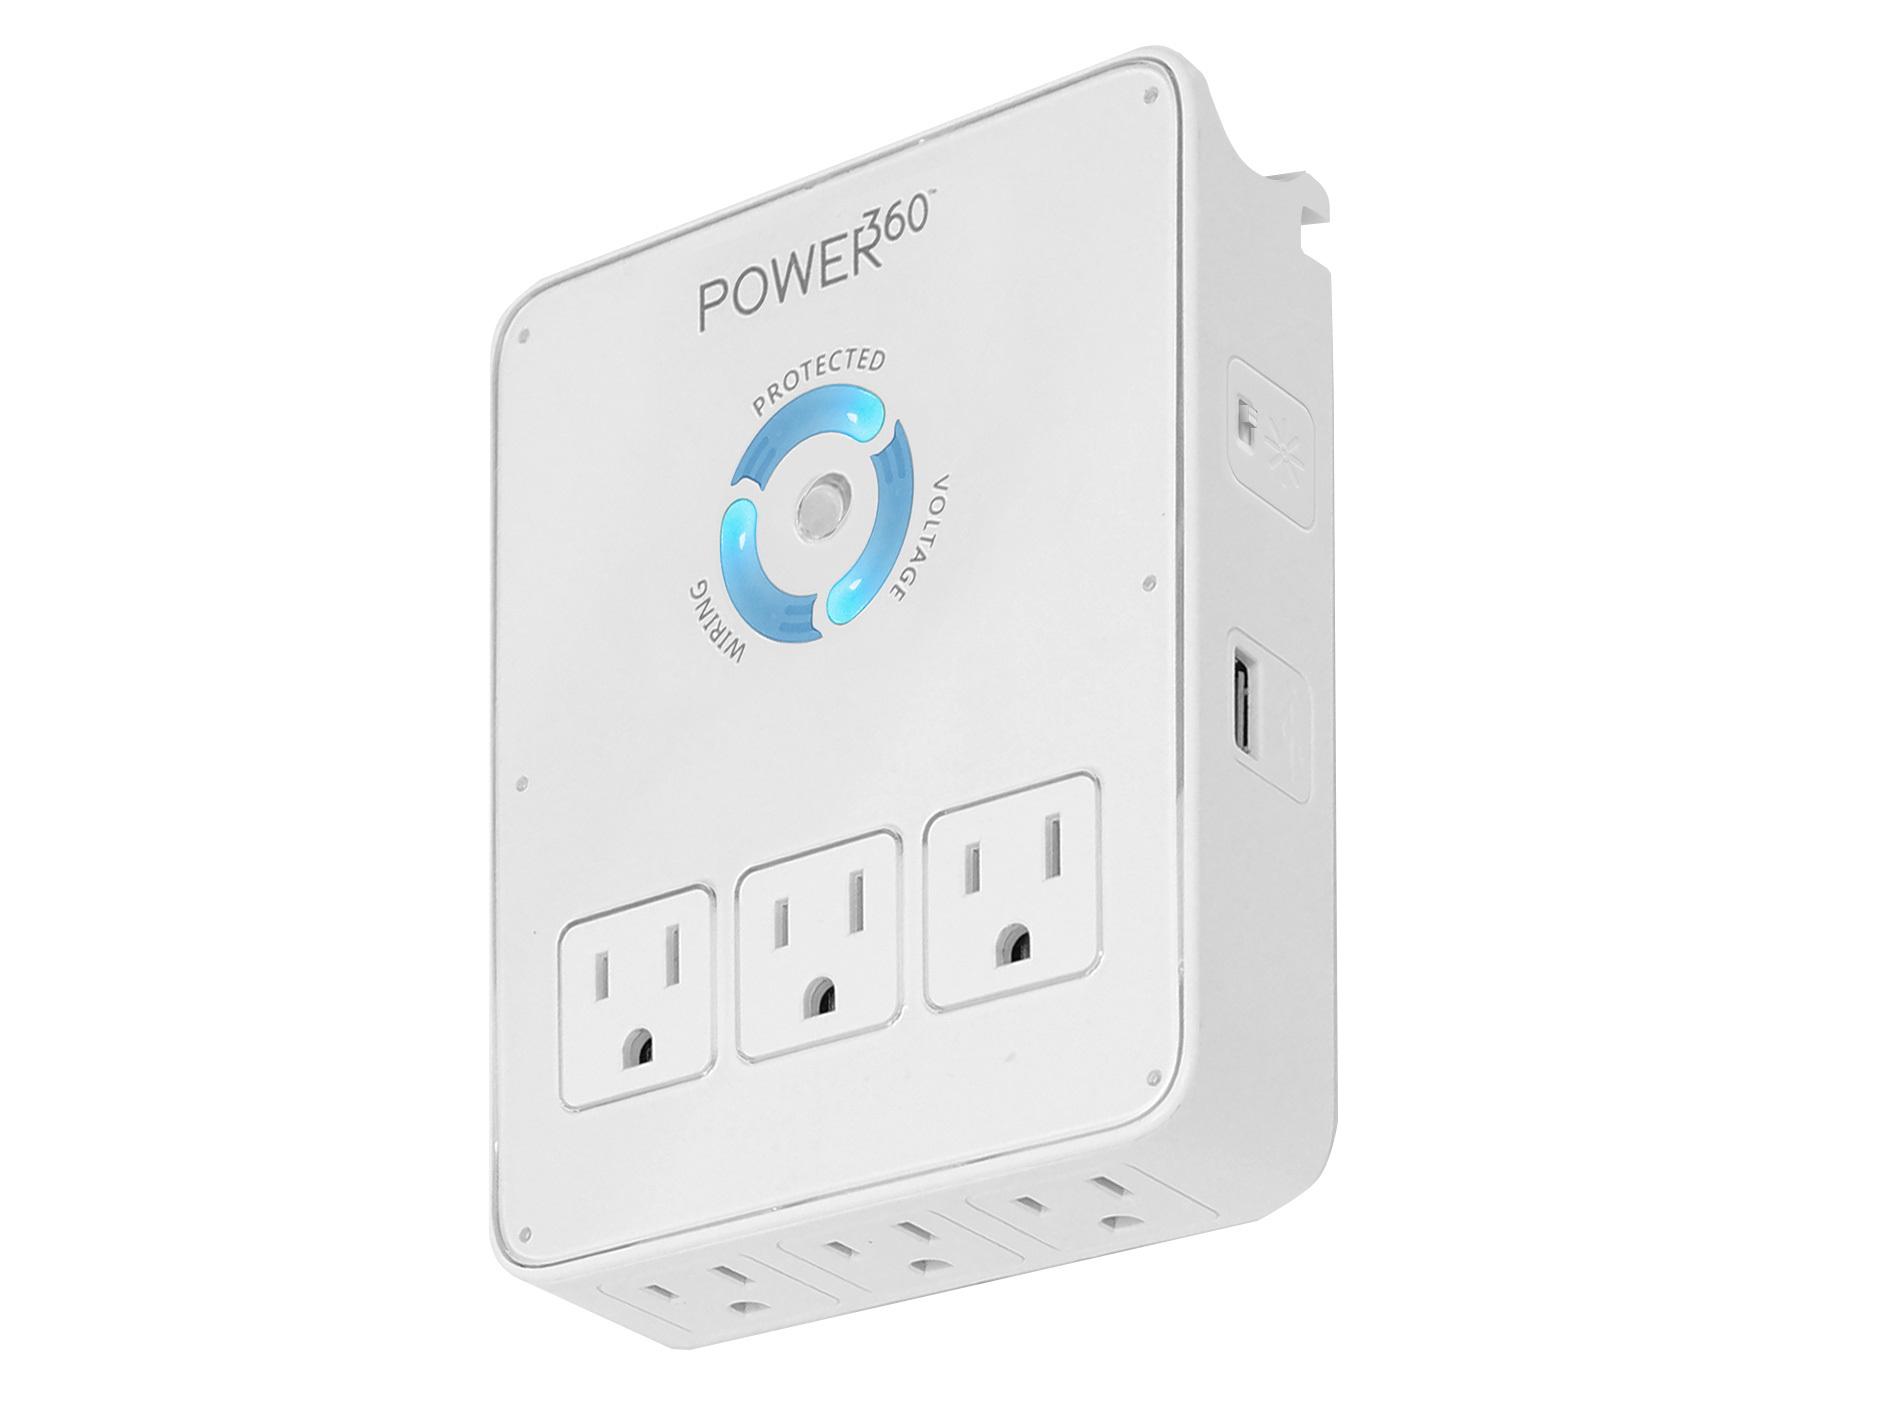 P360-DOCK Power360 6 Outlet Wall Tap/Charging Station by Panamax